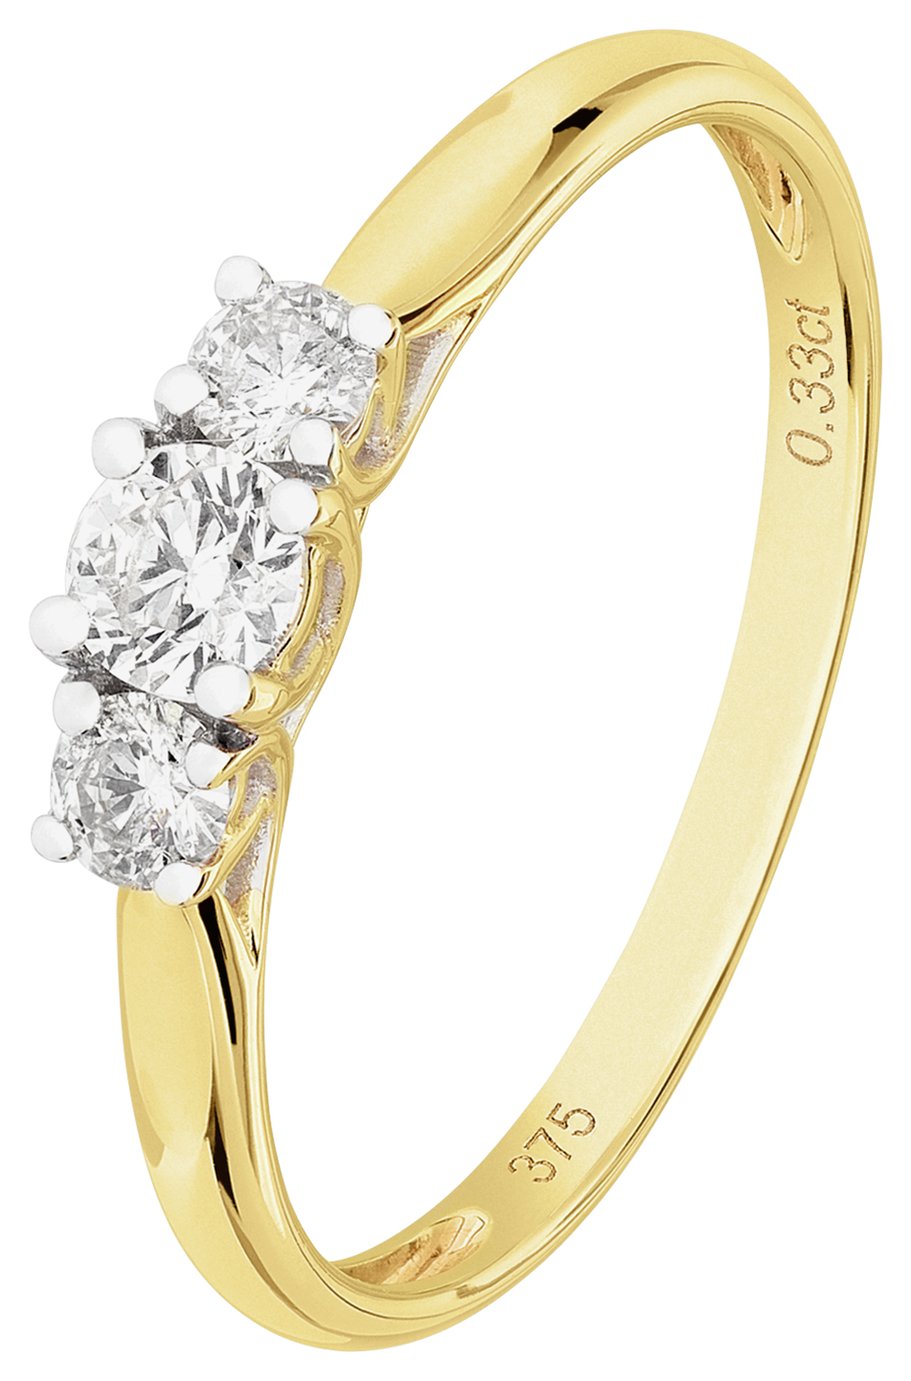 Revere 9ct Gold 0.33ct Diamond Trilogy Engagement Ring - S